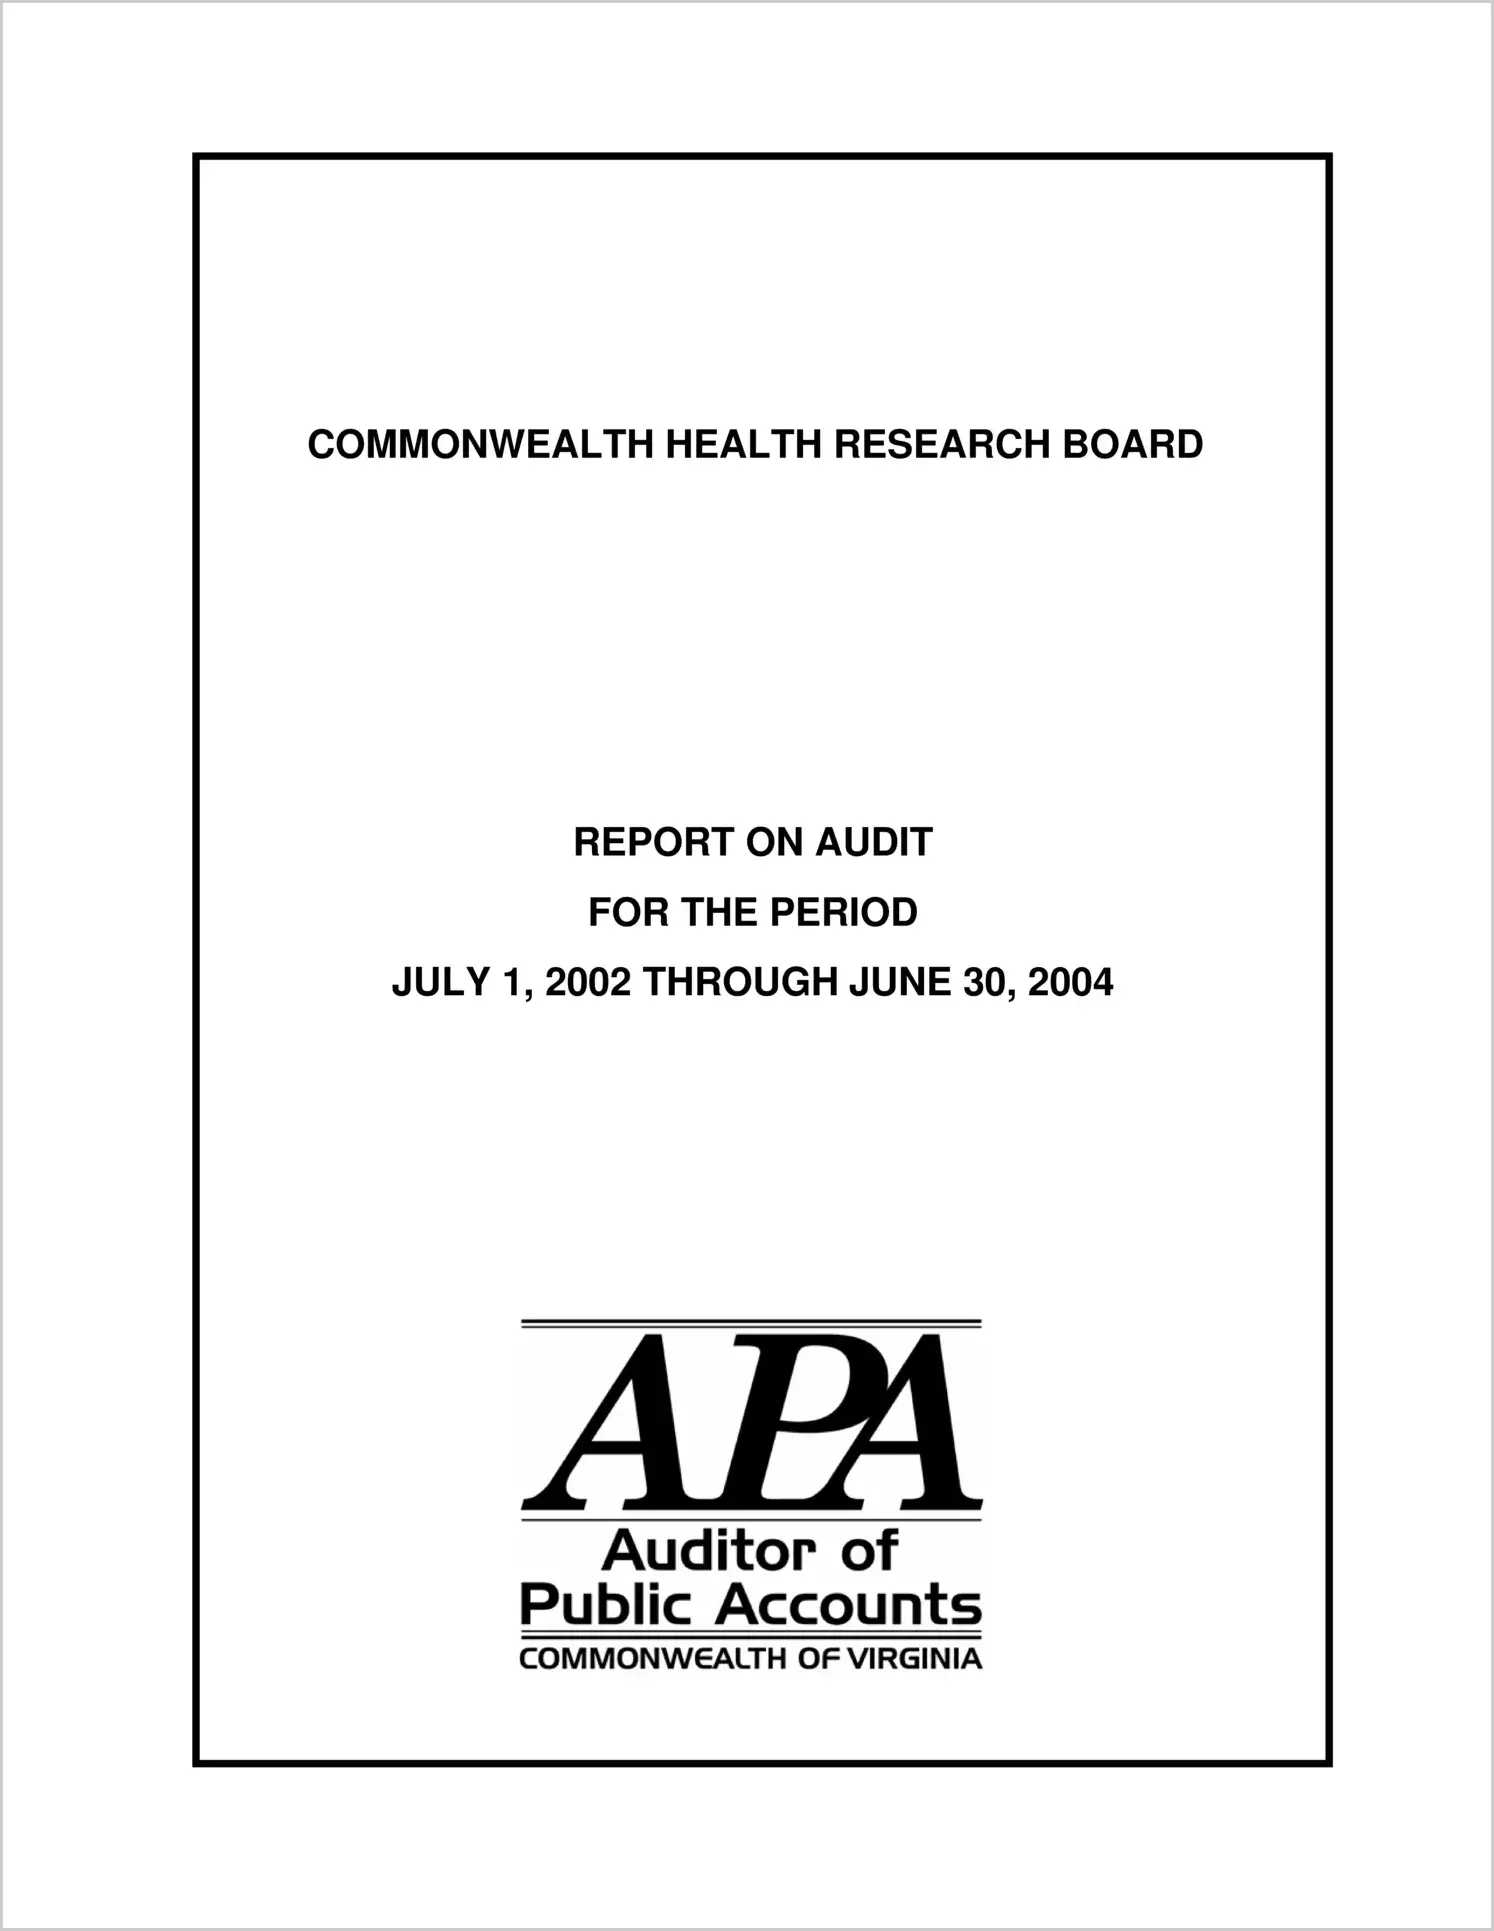 Commonwealth Health Research Board for the period July 1, 2002 through June 30, 2004